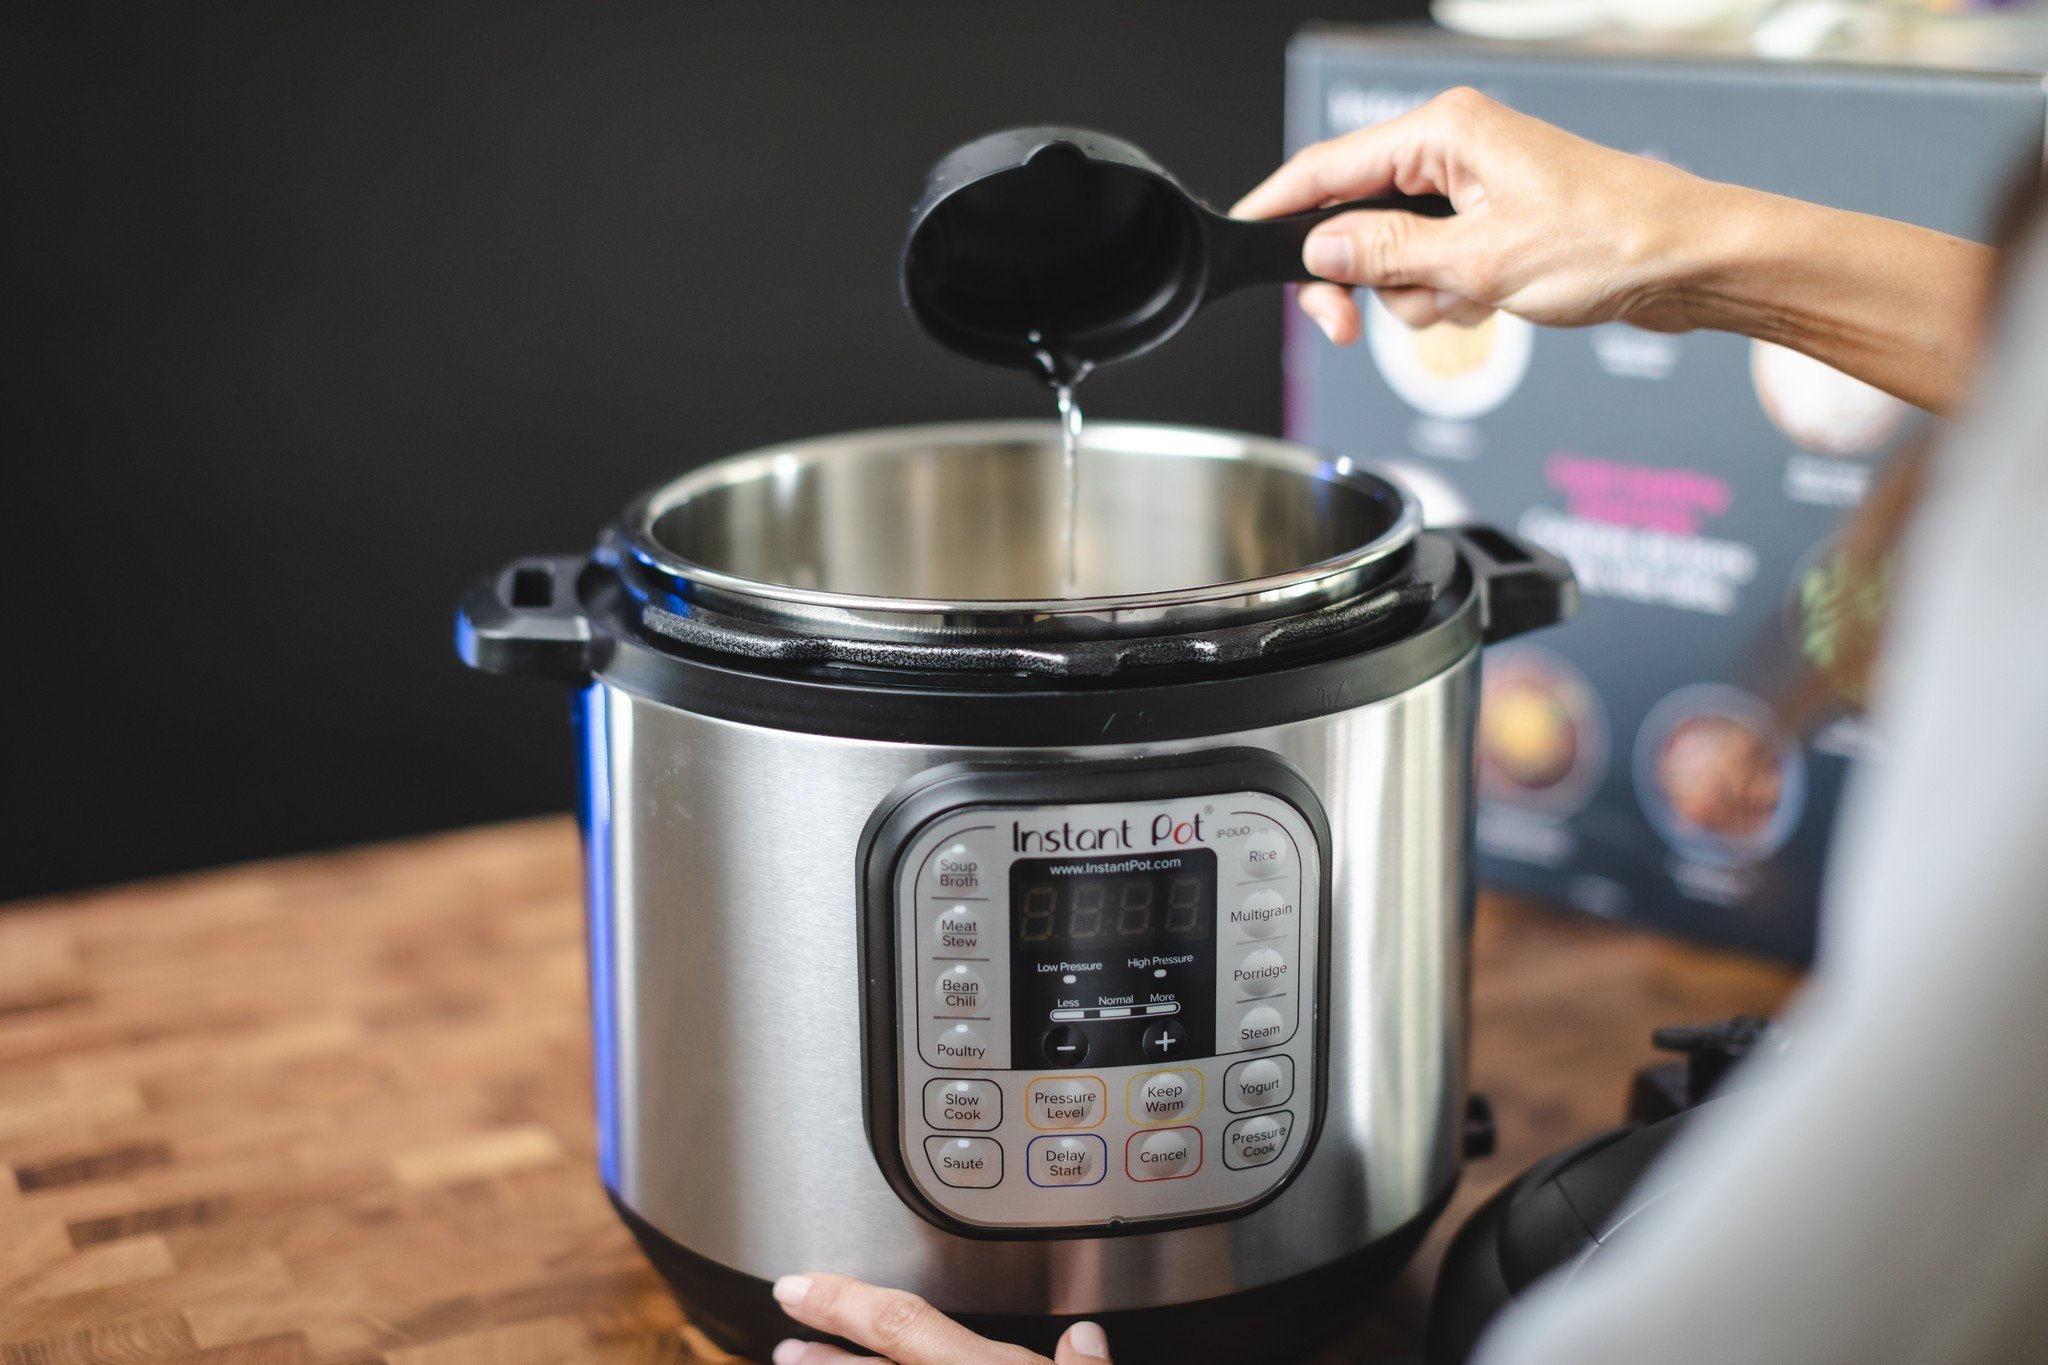 https://www.imore.com/sites/imore.com/files/styles/large_wm_blw/public/field/image/2019/11/instant-pot-duo-60-lifestyle-04.jpg?itok=QzrOFS4T